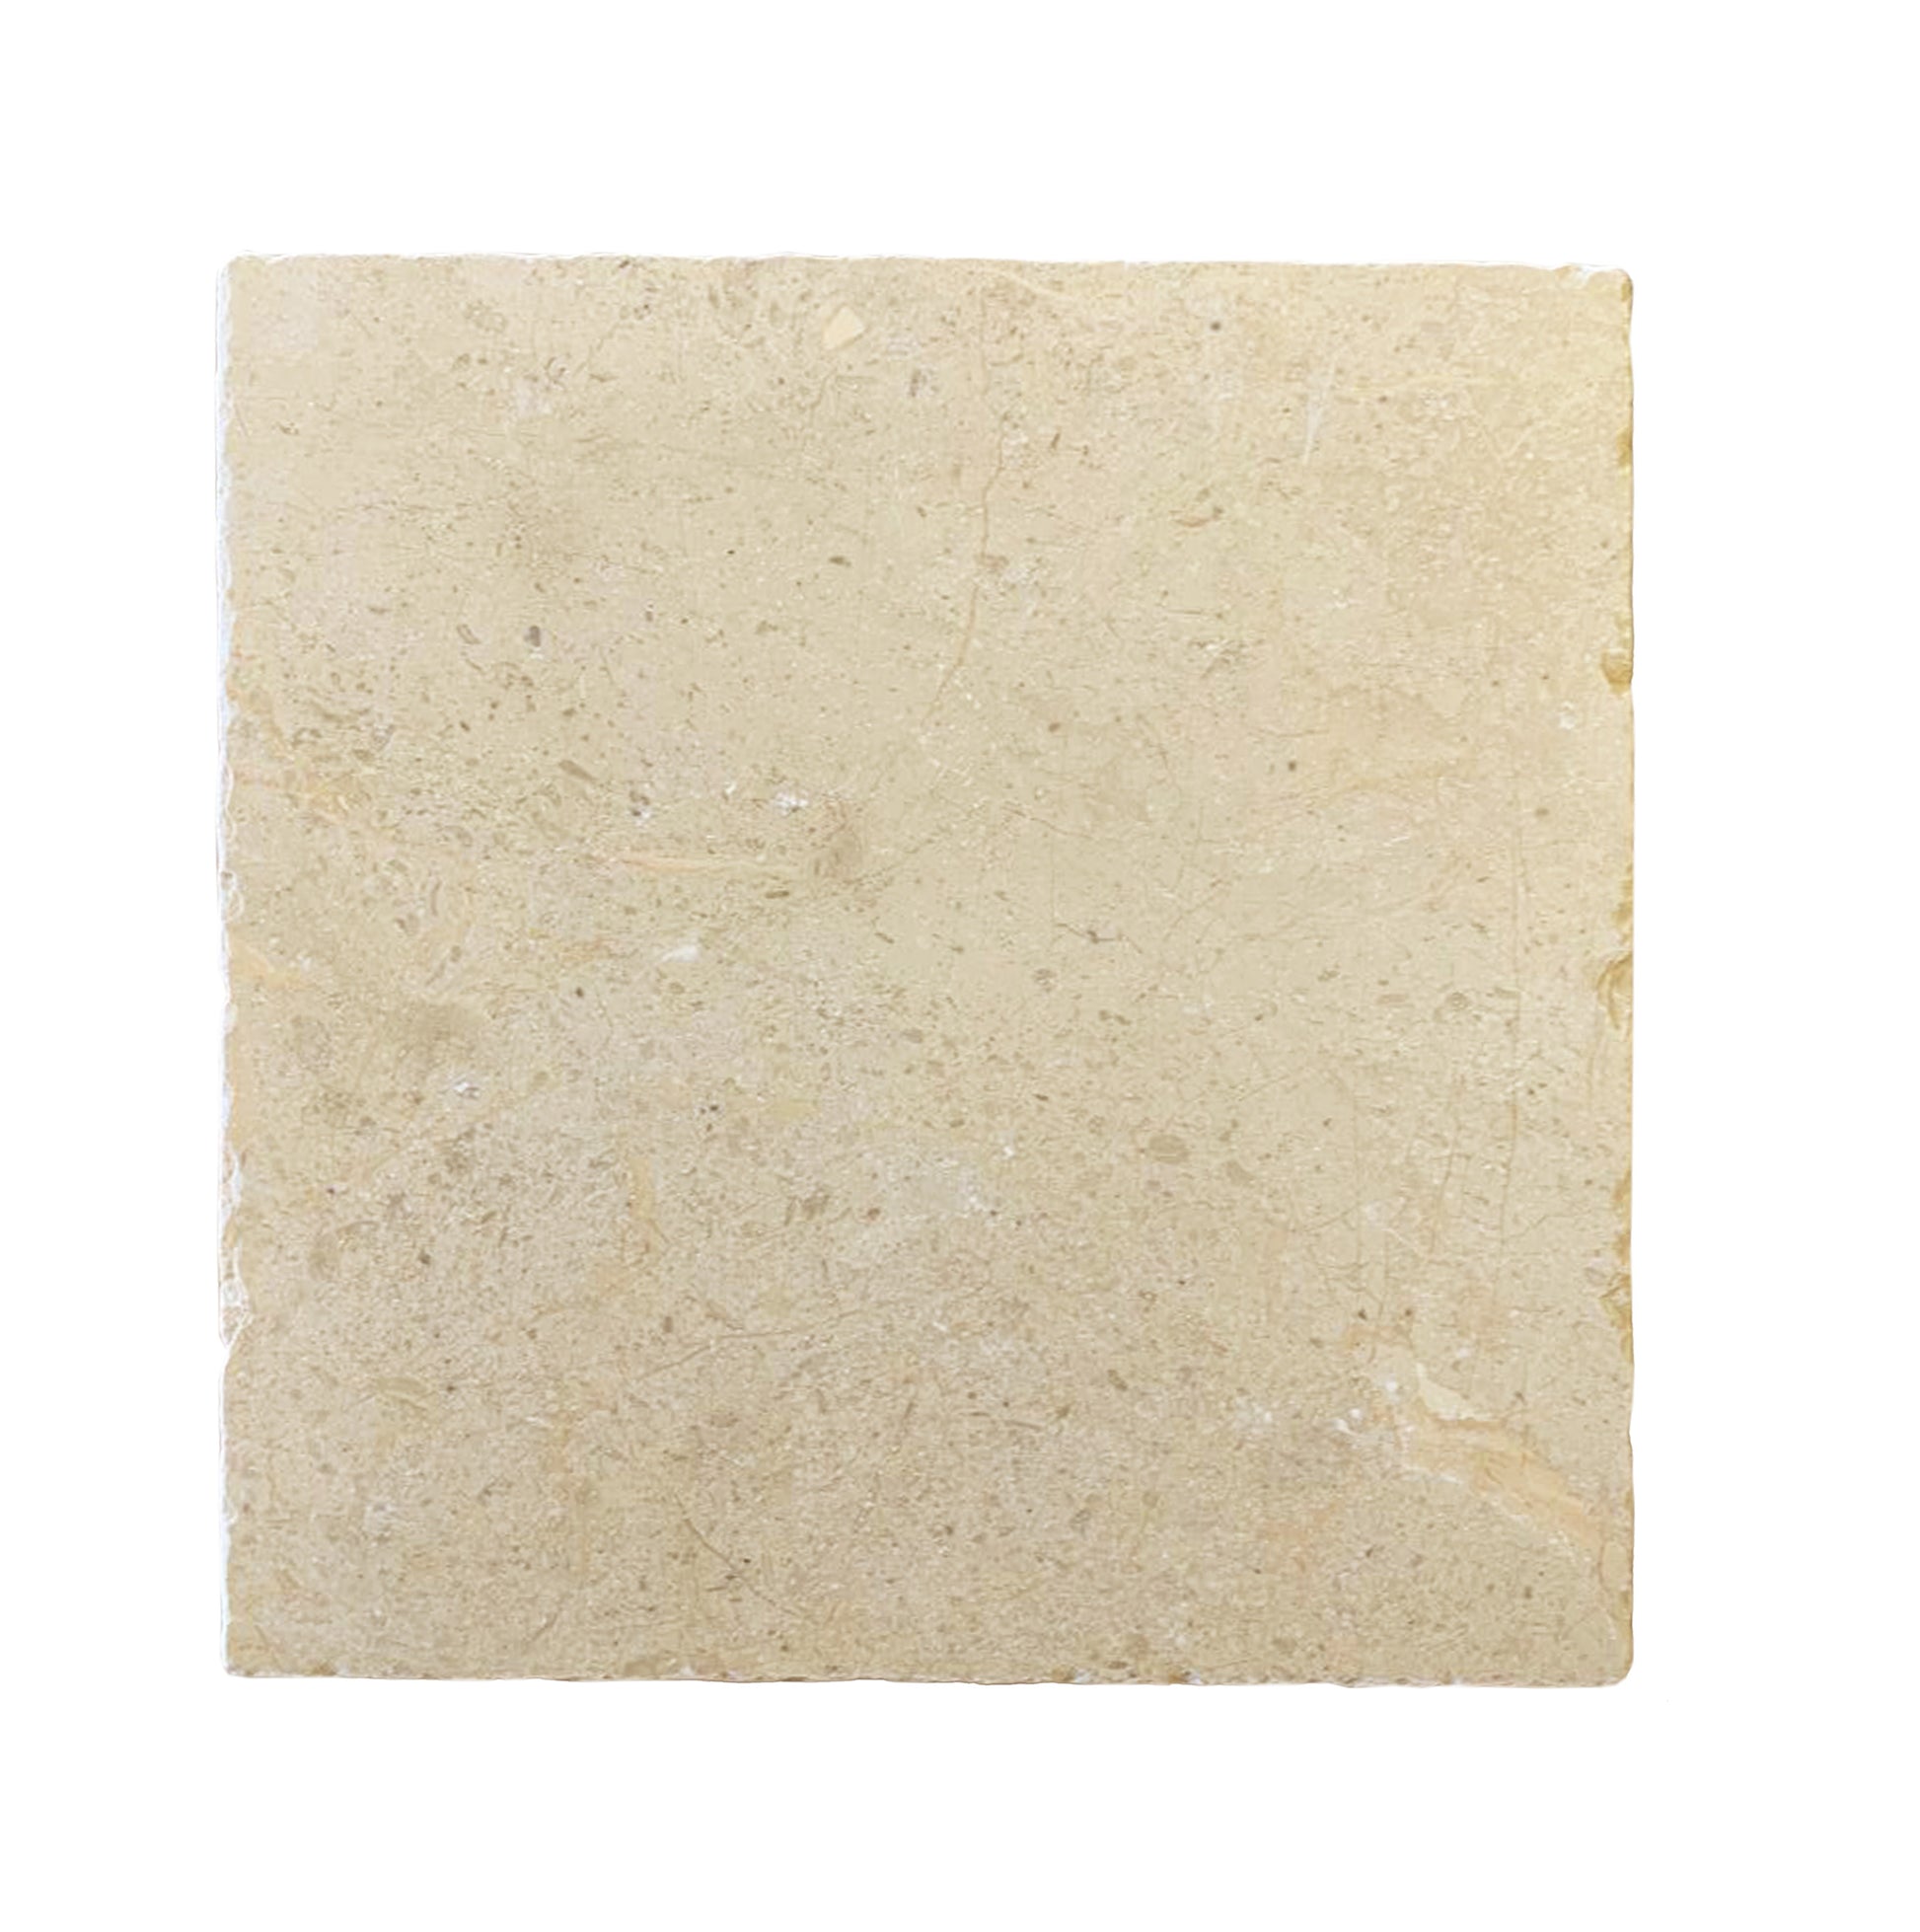 A large square cream marble tile.